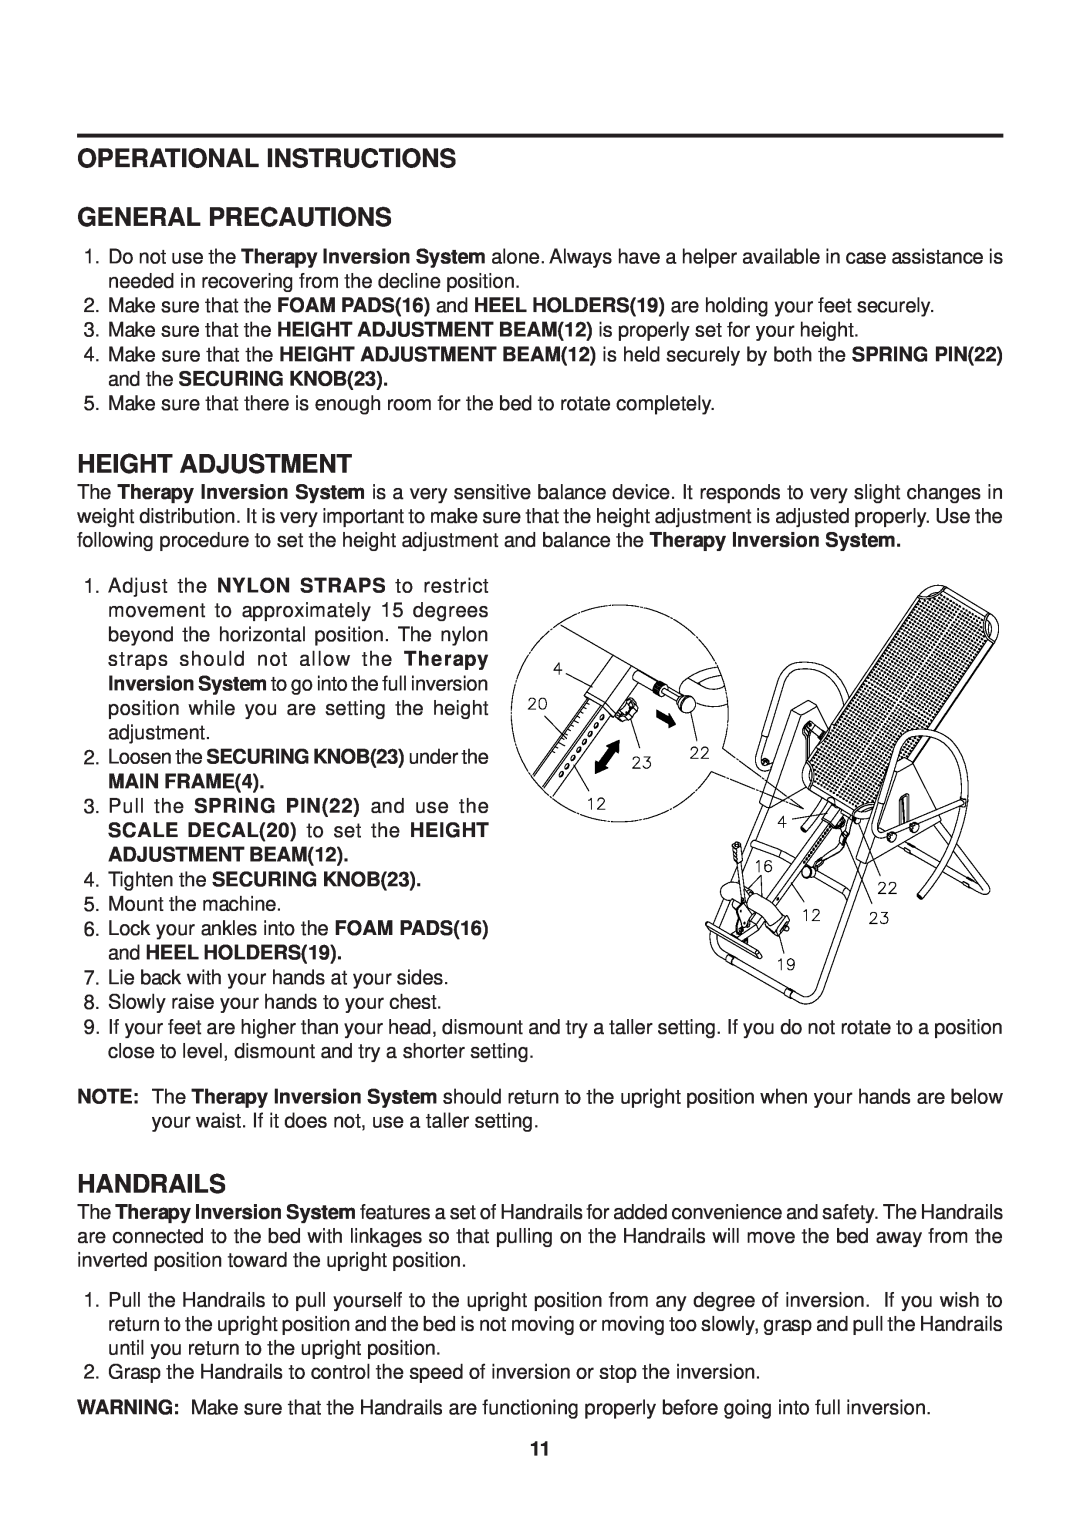 Stamina Products 55-1539A Operational Instructions General Precautions, Height Adjustment, Handrails, MAIN FRAME4 